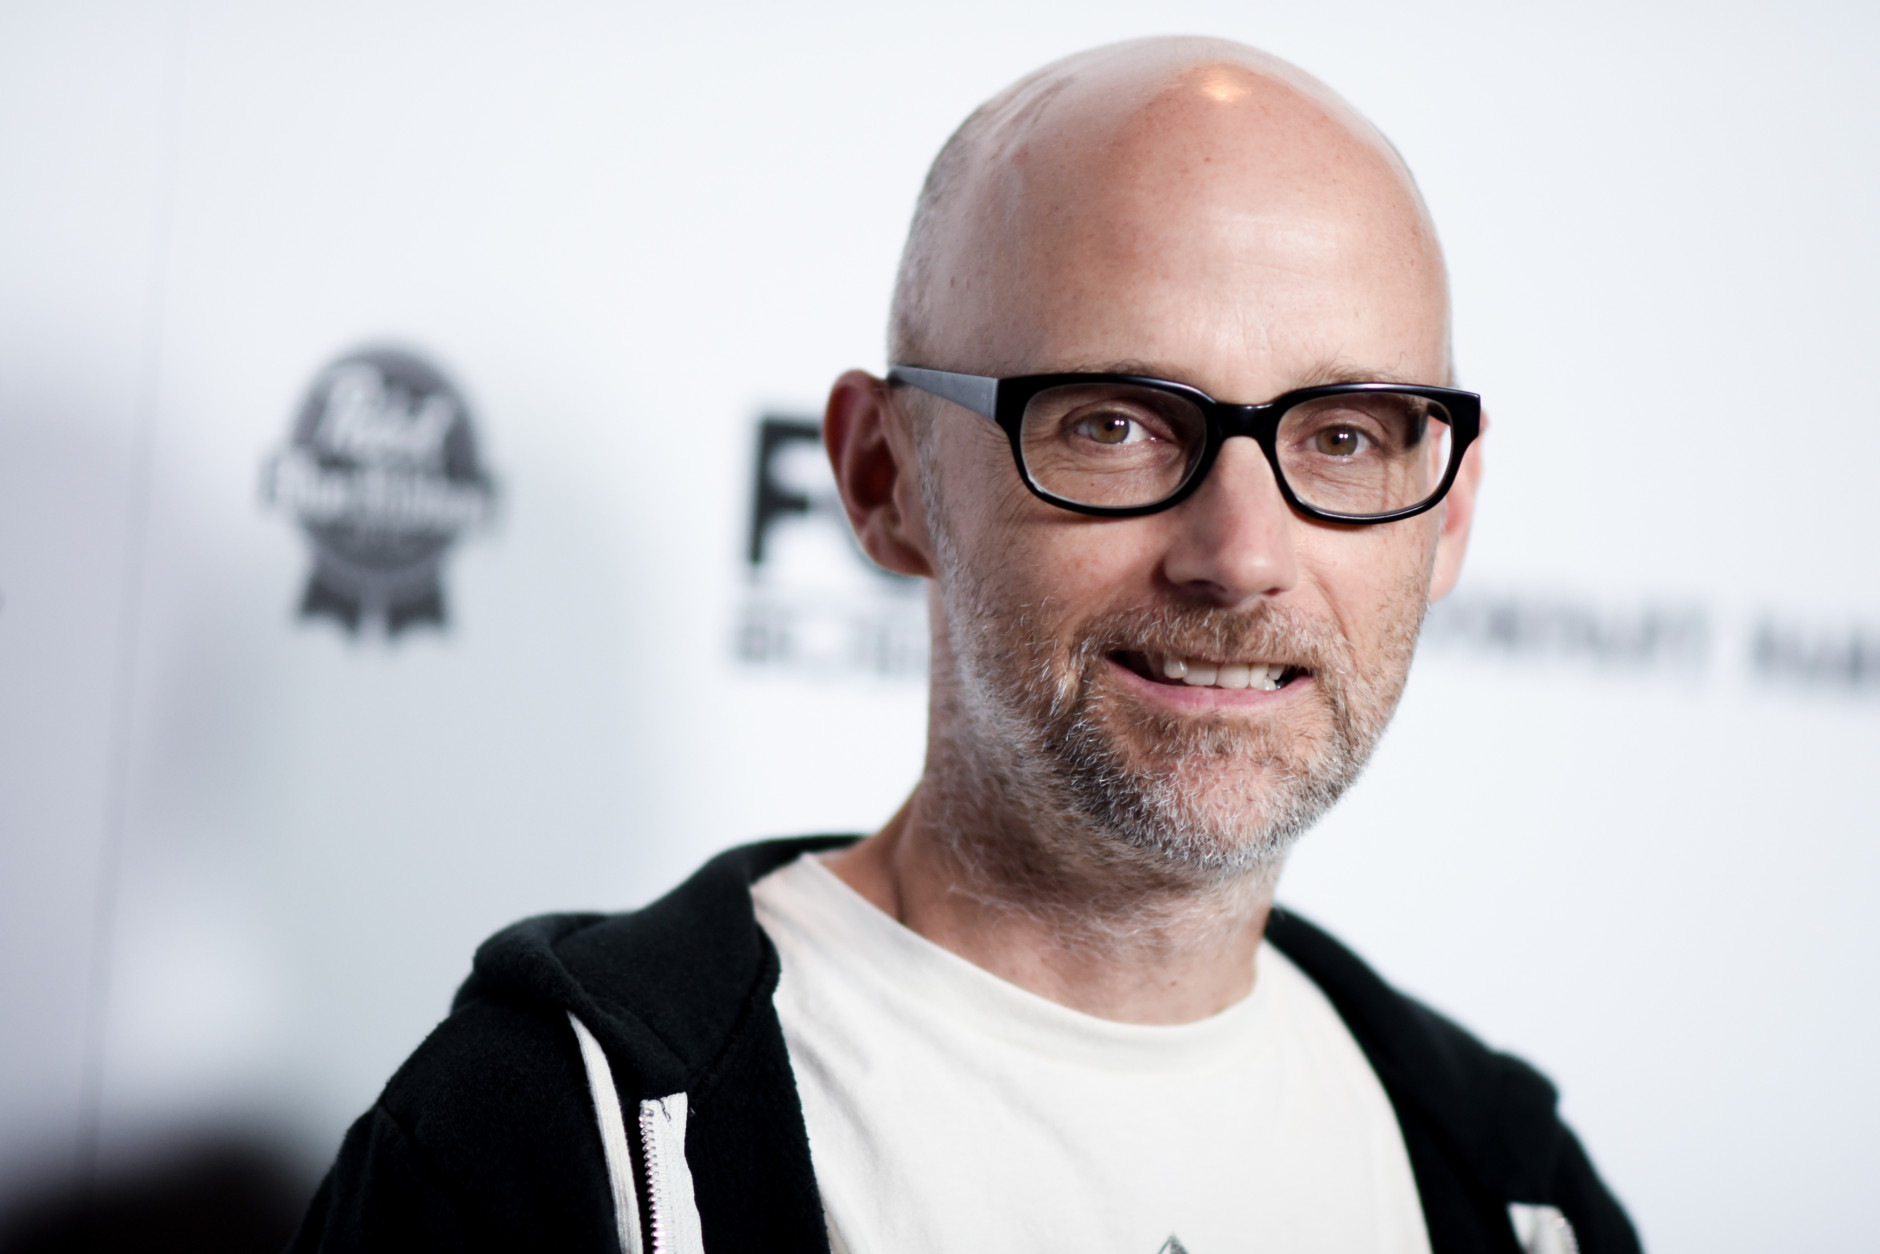 Moby arrives at the LA premiere of "All Things Must Pass" on Thursday Oct. 15, 2015, in Los Angeles. (Photo by Richard Shotwell/Invision/AP)